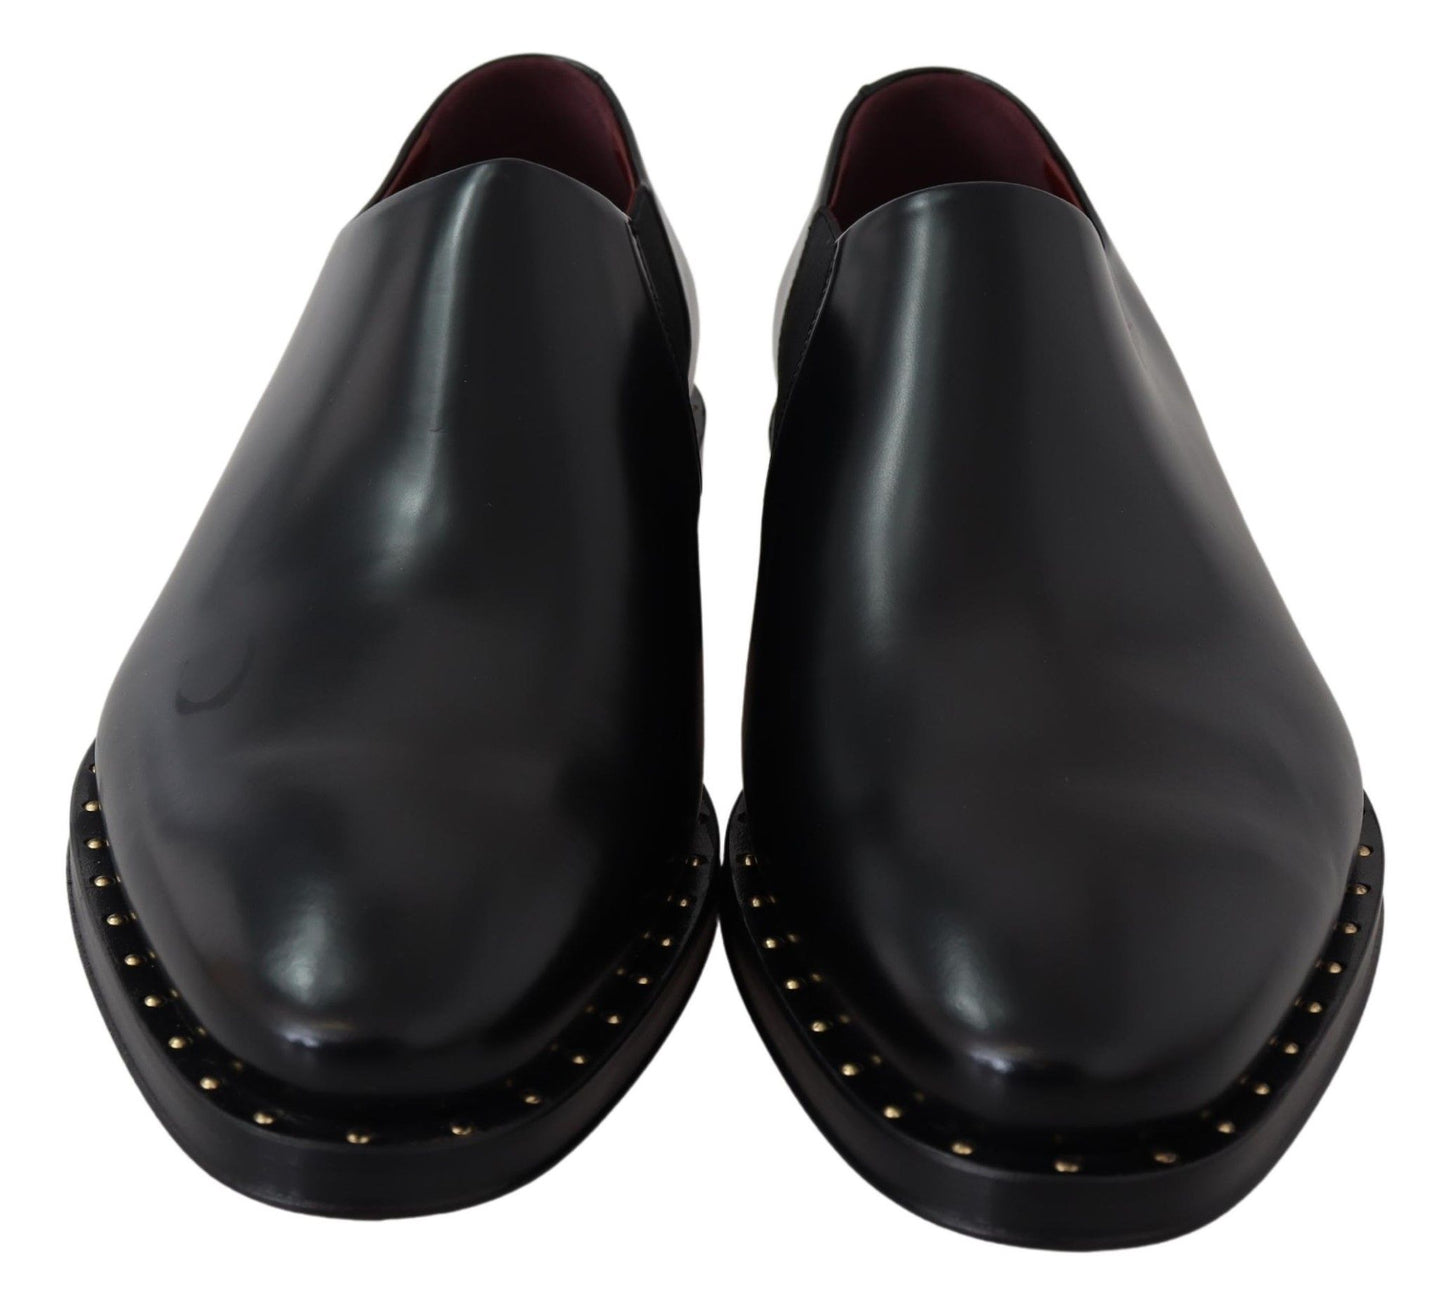 Black Leather Dress Formal  Loafers Shoes